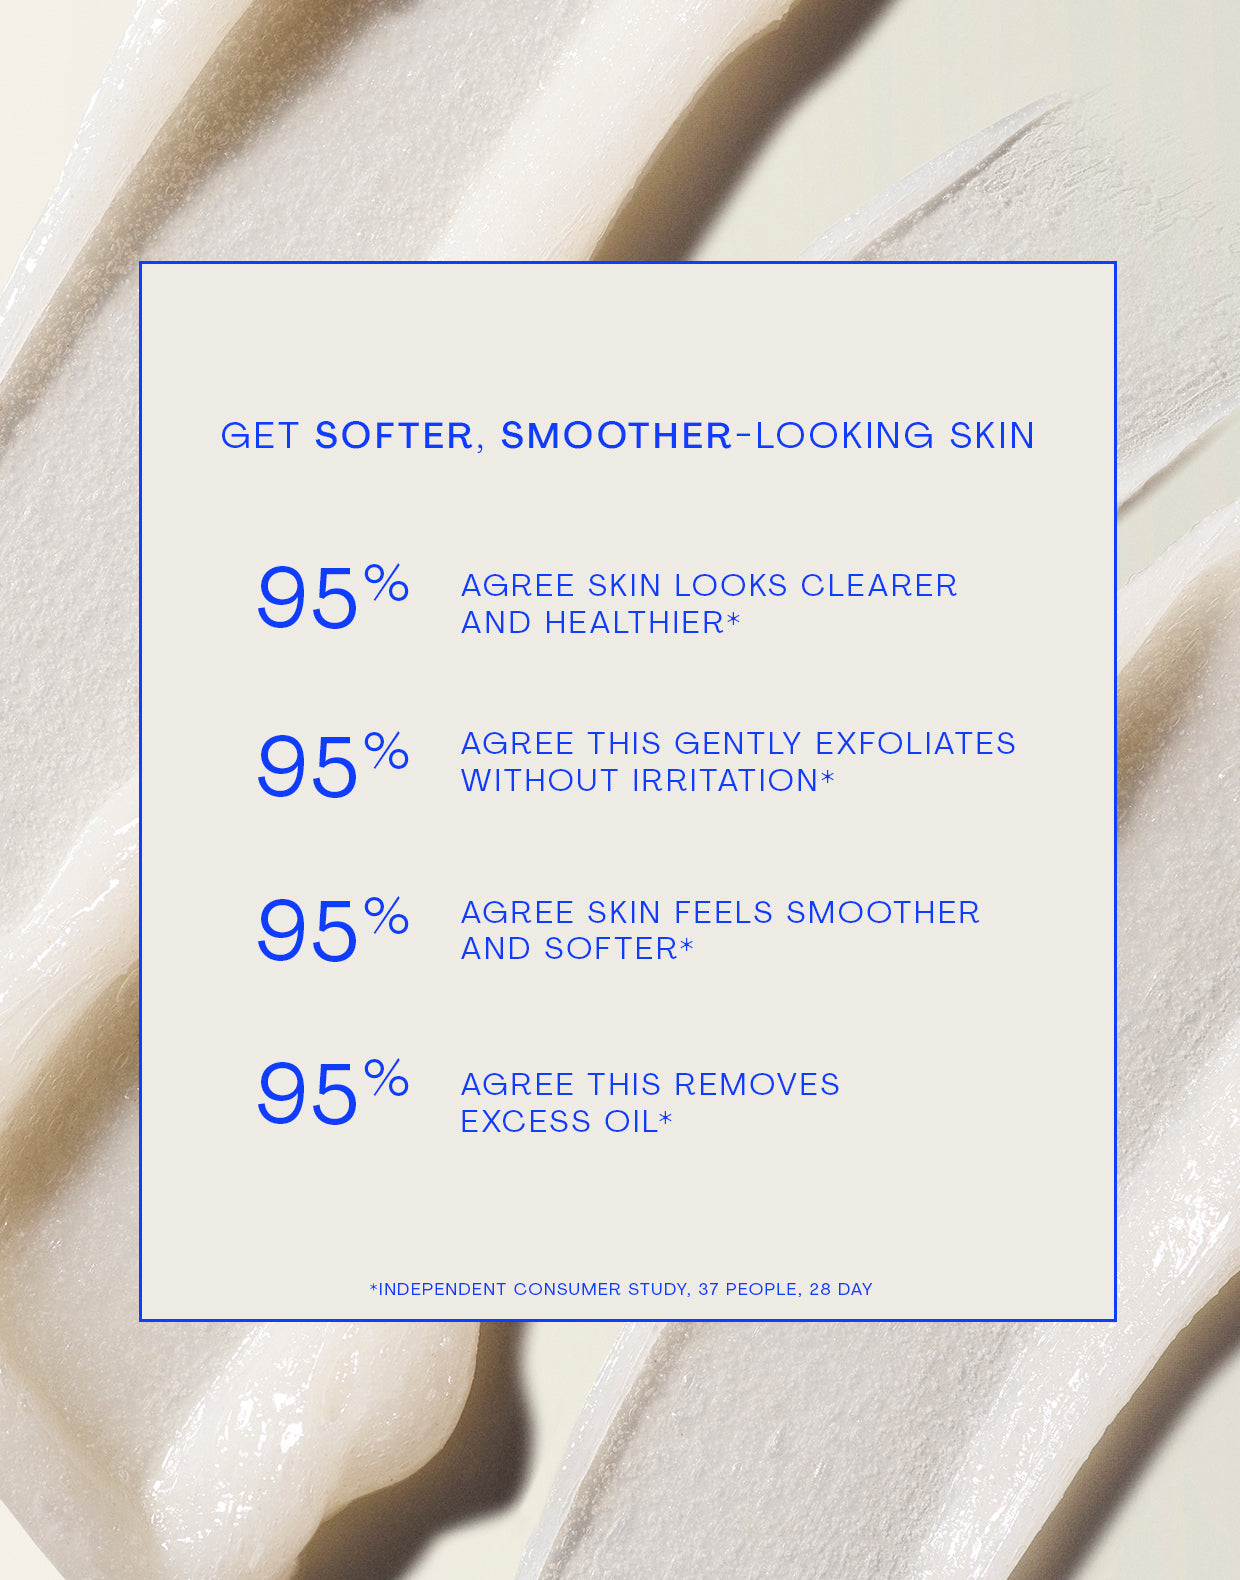 Info graphic with feedback from customer trials; Get softer, smoother-looking skin; 95% agree skin looks clearer and healthier*, 95% agree this gently exfoliates without irritation*, 95% agree skin feels smoother and softer*, 95% agree this removes excess oil*; independent consumer study, 37 people, 28 day. 